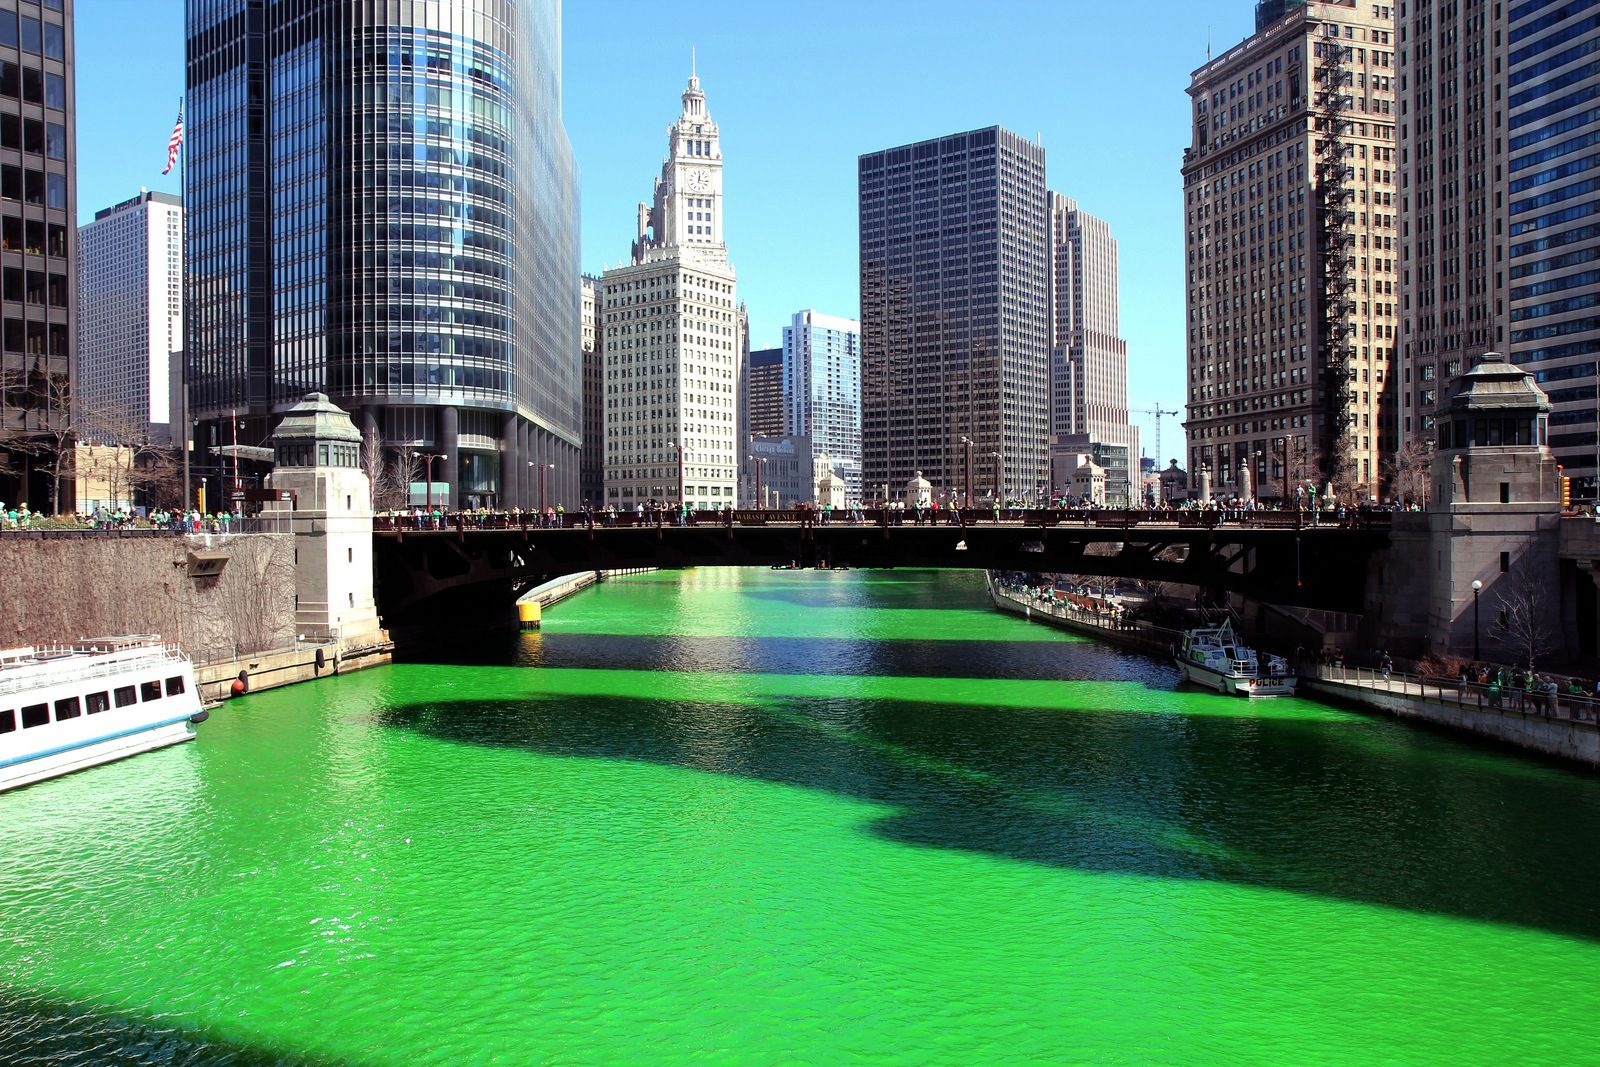 St. Patrick’s Day in the USA